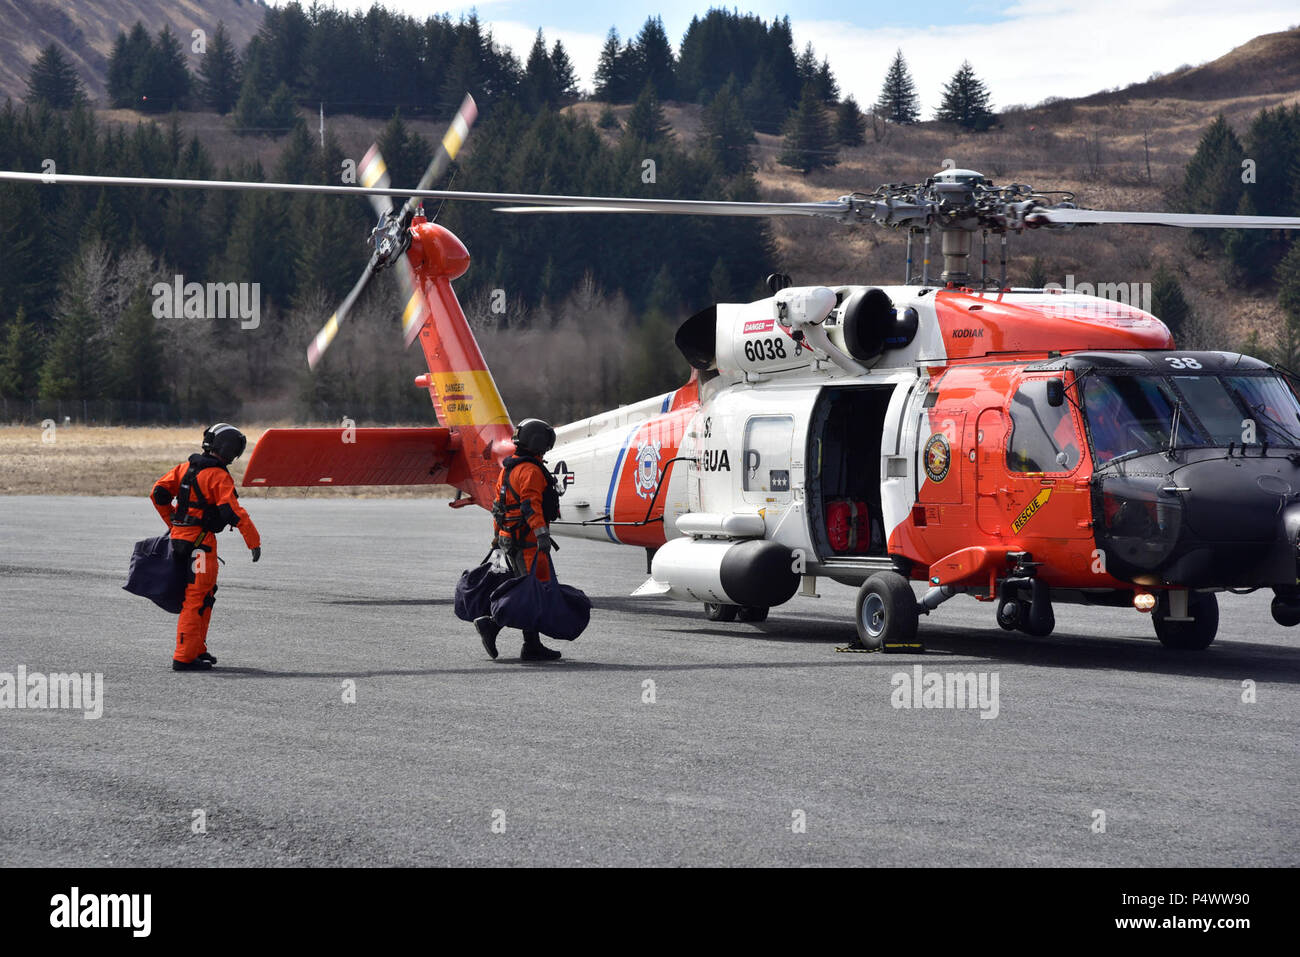 KODIAK, Alaska - Aircraft Maintenance Technicians load survival gear onto a U.S. Coast Guard MH-60T Jayhawk attached to Air Station Kodiak, Alaska prior to takeoff. Northern Edge 2017 is Alaska's premiere joint-training exercise designed to practice operations, techniques, and procedures as well as enhance interoperability among the services. Thousands of participants from all the services; Sailors, Airmen, Soldiers, Marines, and Coast Guard personnel from active duty, Reserve and National Guard units, are involved. Stock Photo